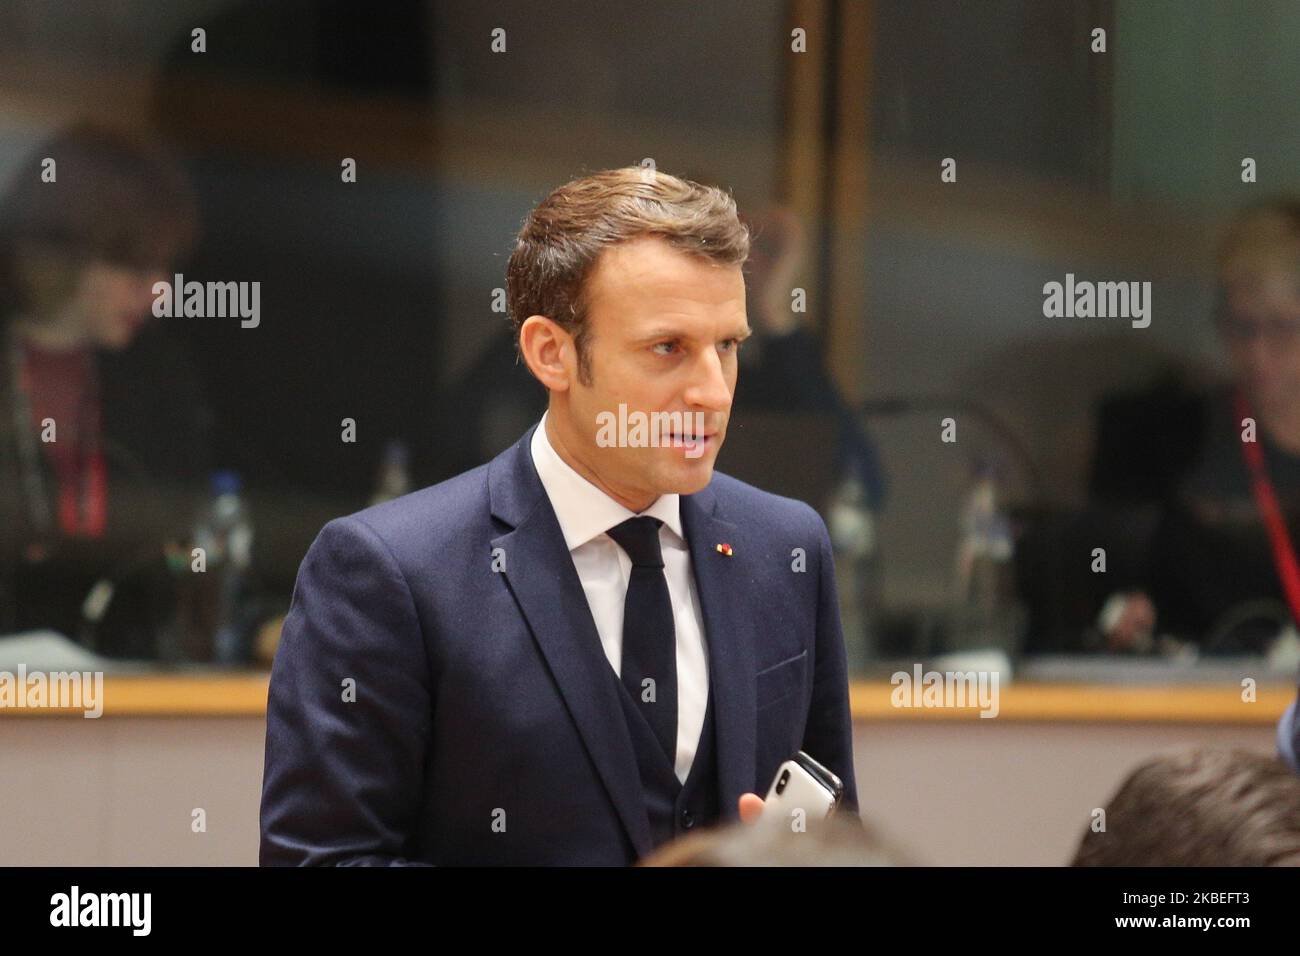 Emmanuel Macron. the French President at the European Council. Emmanuel Jean-Michel Frédéric Macron President of France as seen arriving and talking with EU leaders, Presidents and Prime Minister, at the roundtable during the second day of the European Council - Euro summit - EU leaders meeting at the EU headquarters in Brussels, Belgium - December 13, 2019 (Photo by Nicolas Economou/NurPhoto) Stock Photo